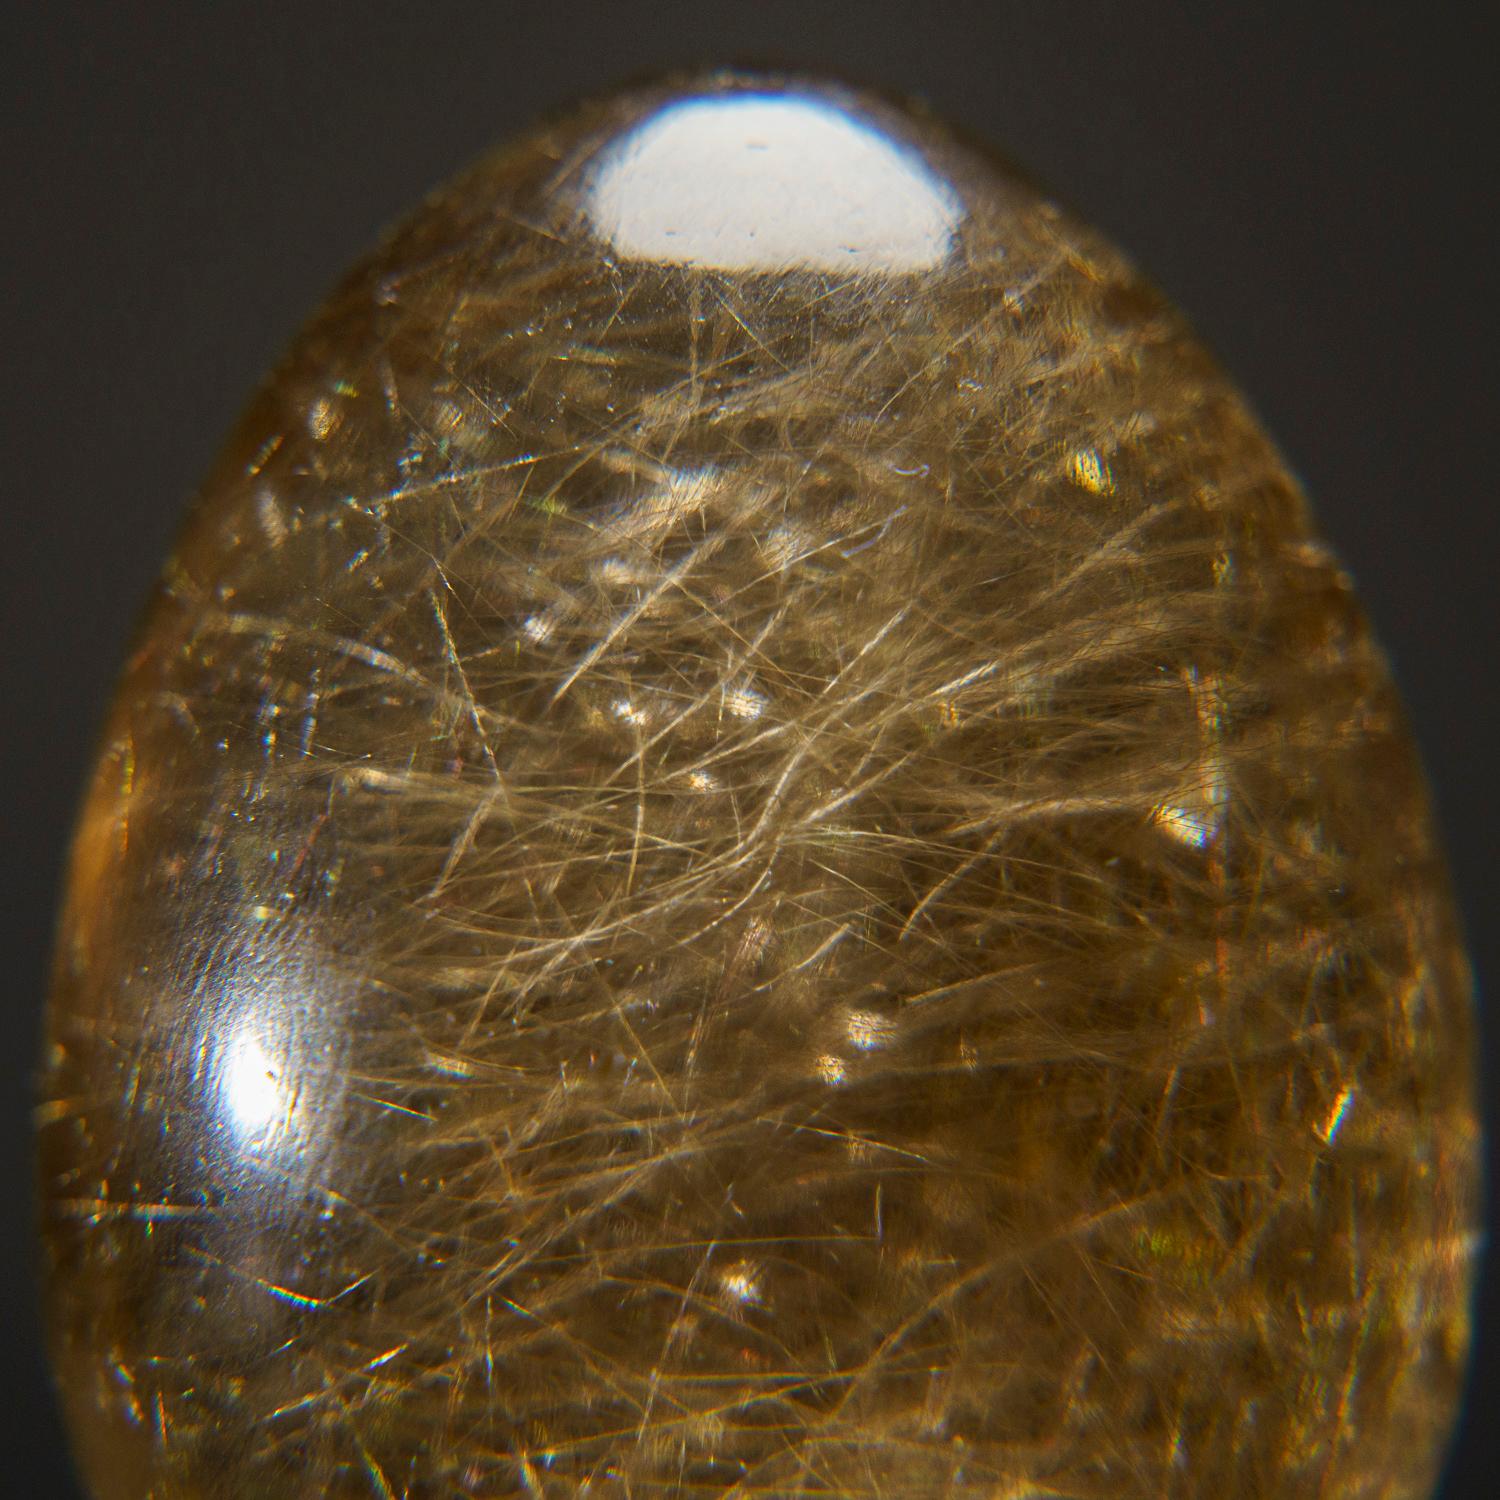 Connect deeply to your higher self by welcoming this one-of-a-kind Rutilated Quartz egg. An essential tool for manifesting transformation and inner healing, its vibrations will help you access higher realms and receive divine guidance. With bold